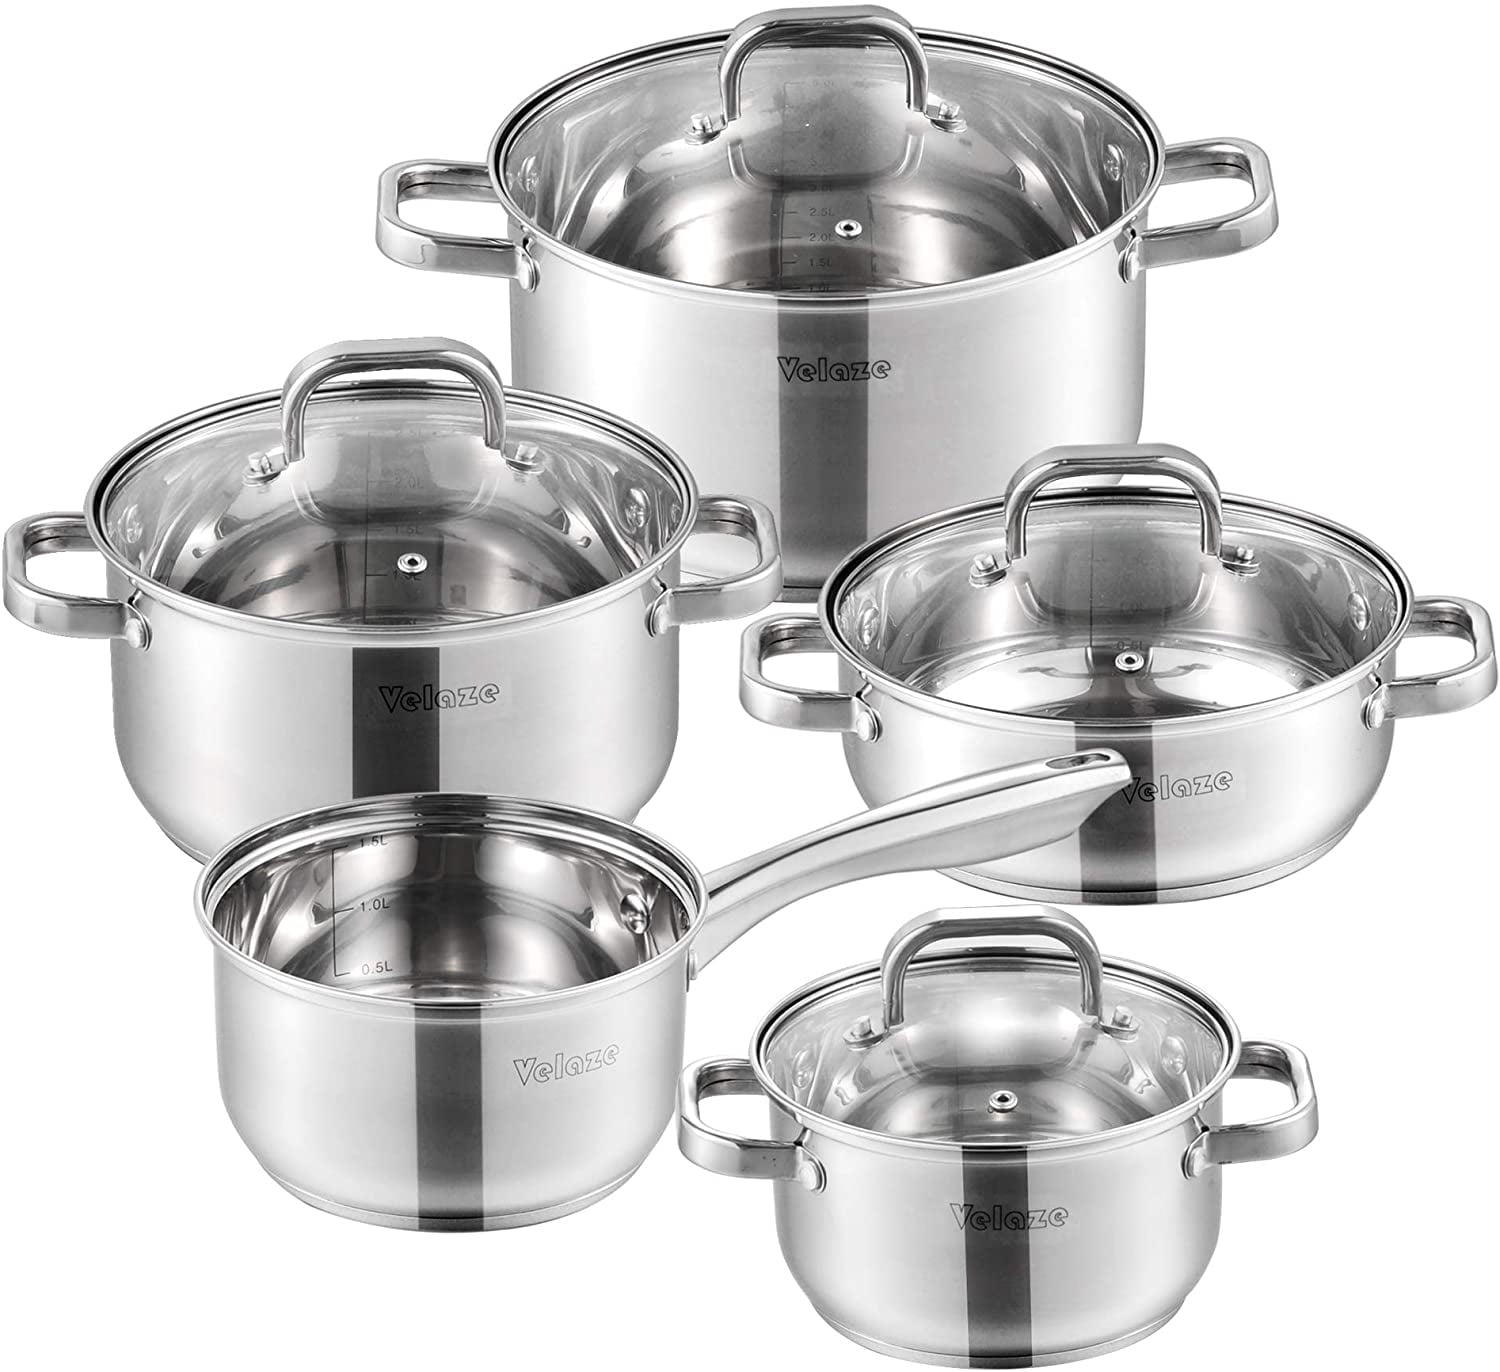 New TEFAL DUETTO Stainless STEEL Kitchen COOKWARE SET 10 PCS Glass Lid POTS Best 